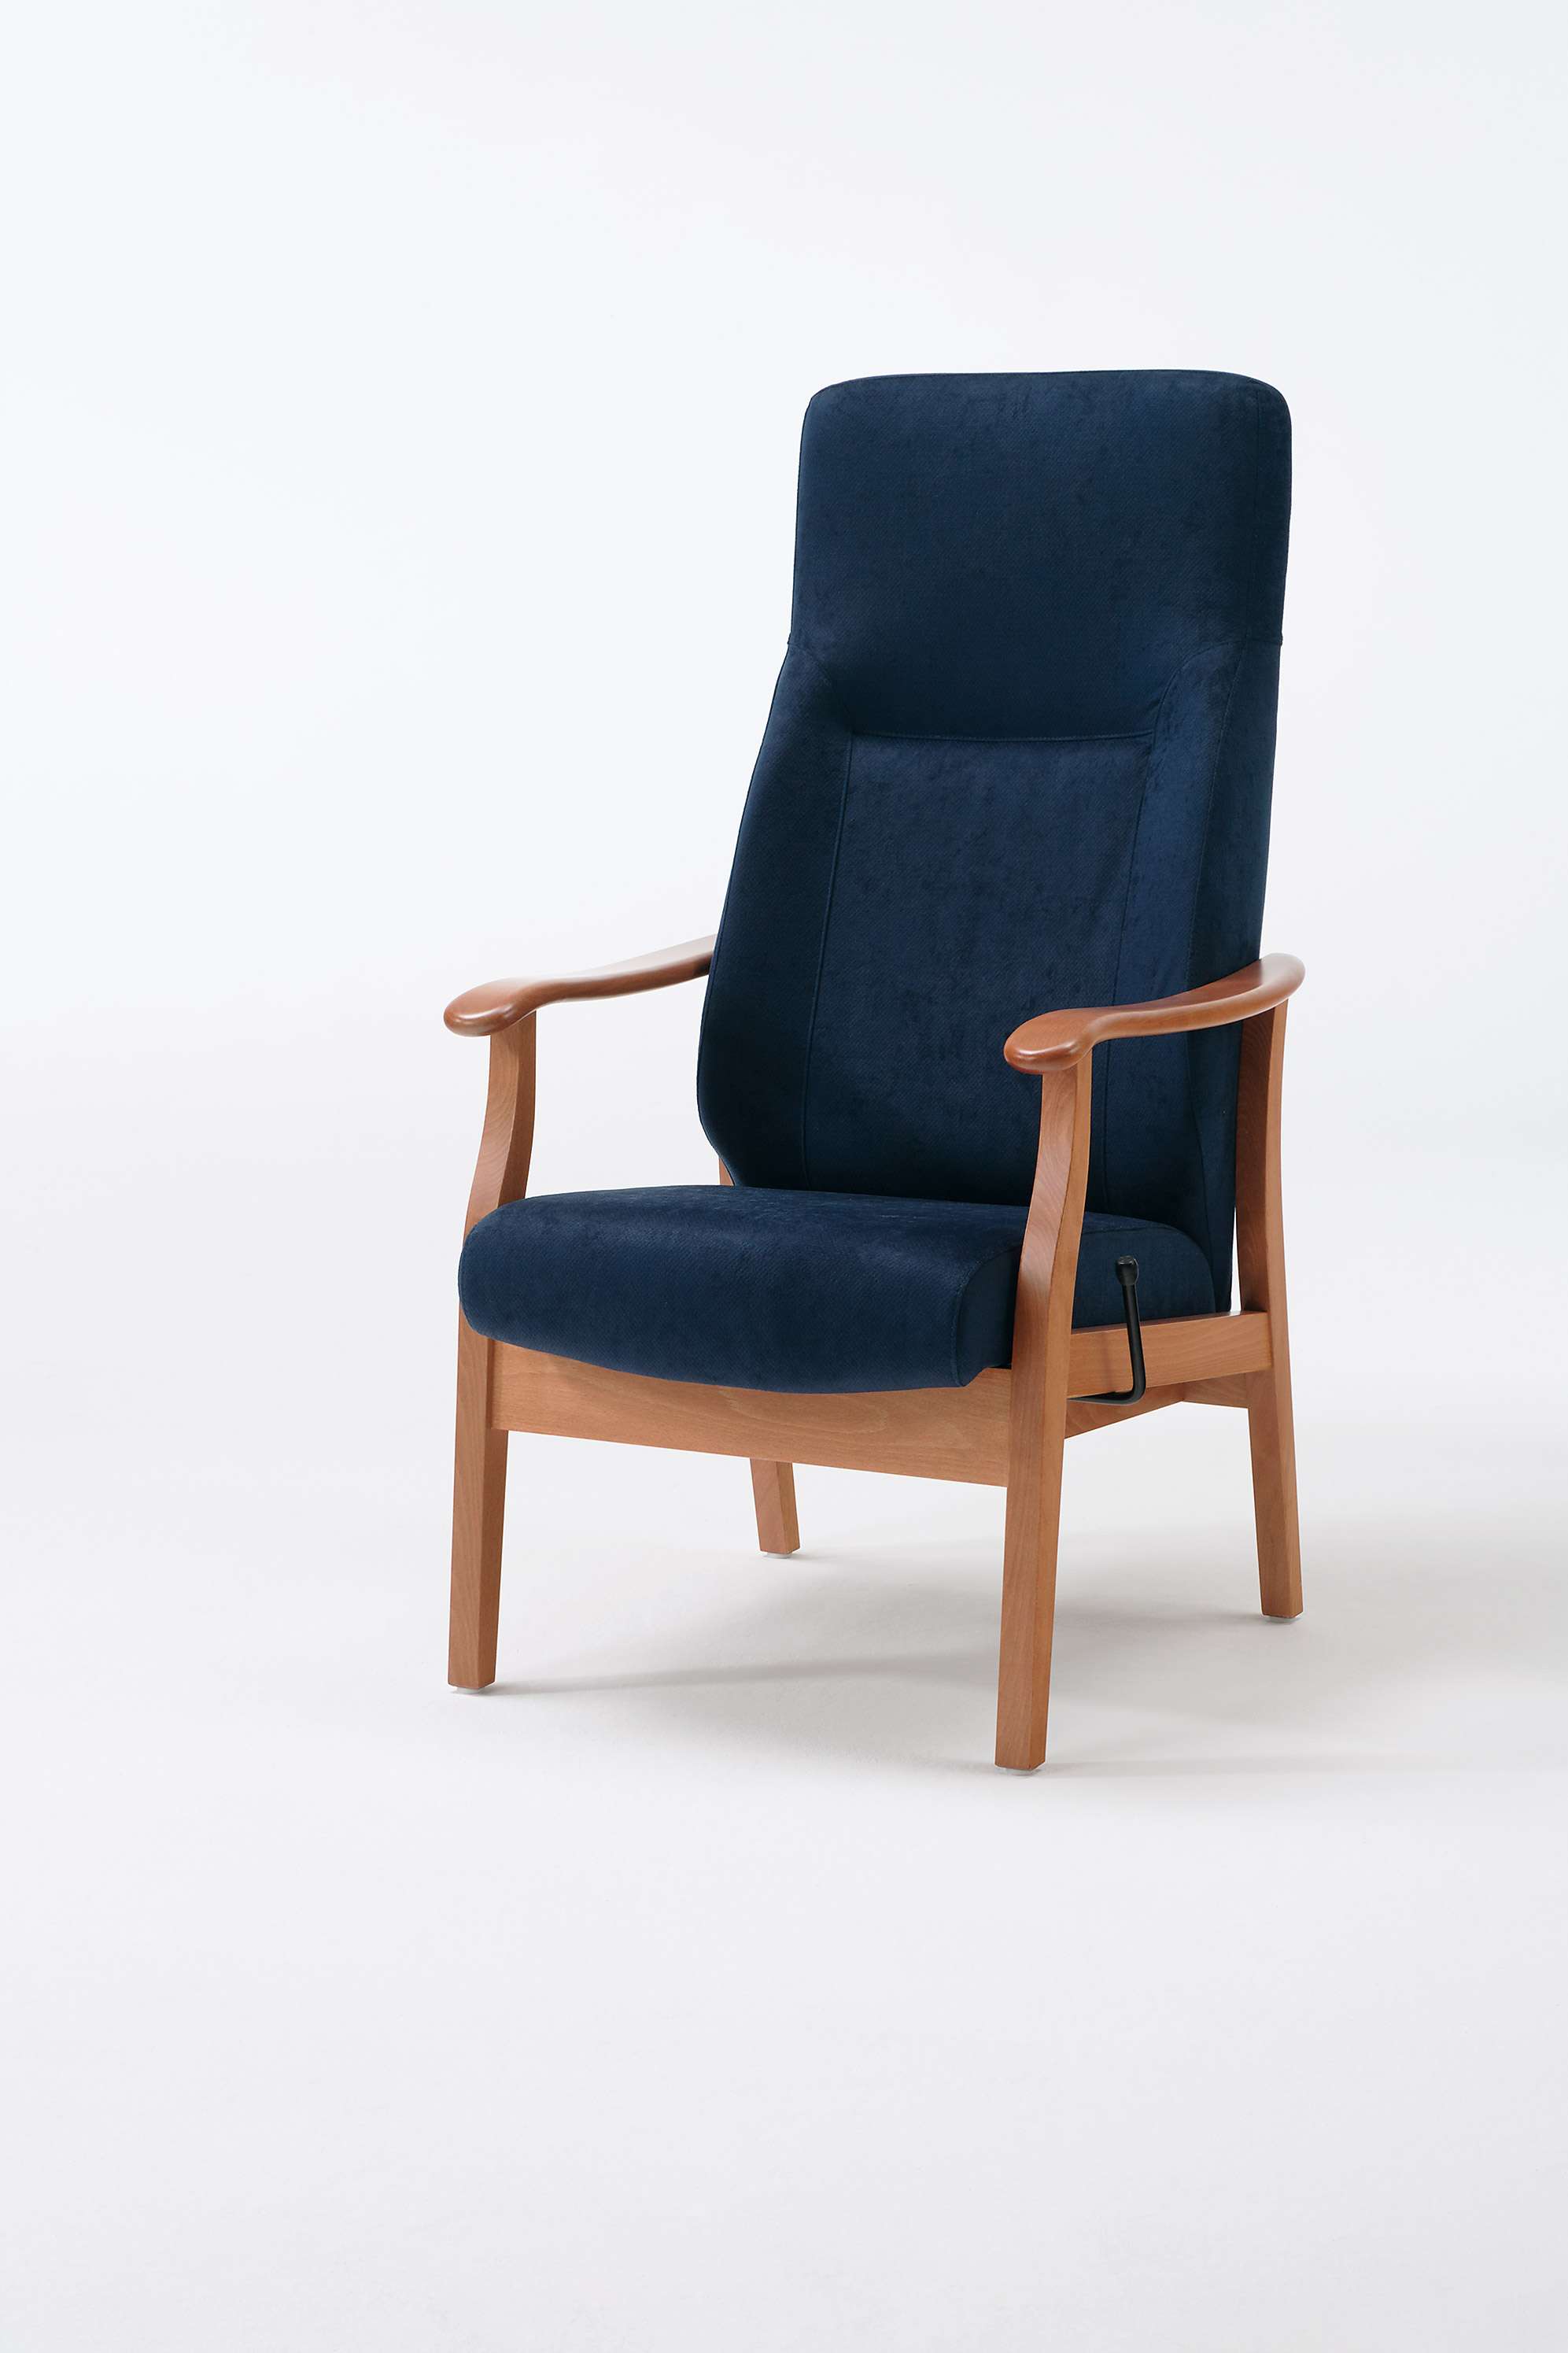 The Sedego model as a high-back adjustable easy chair